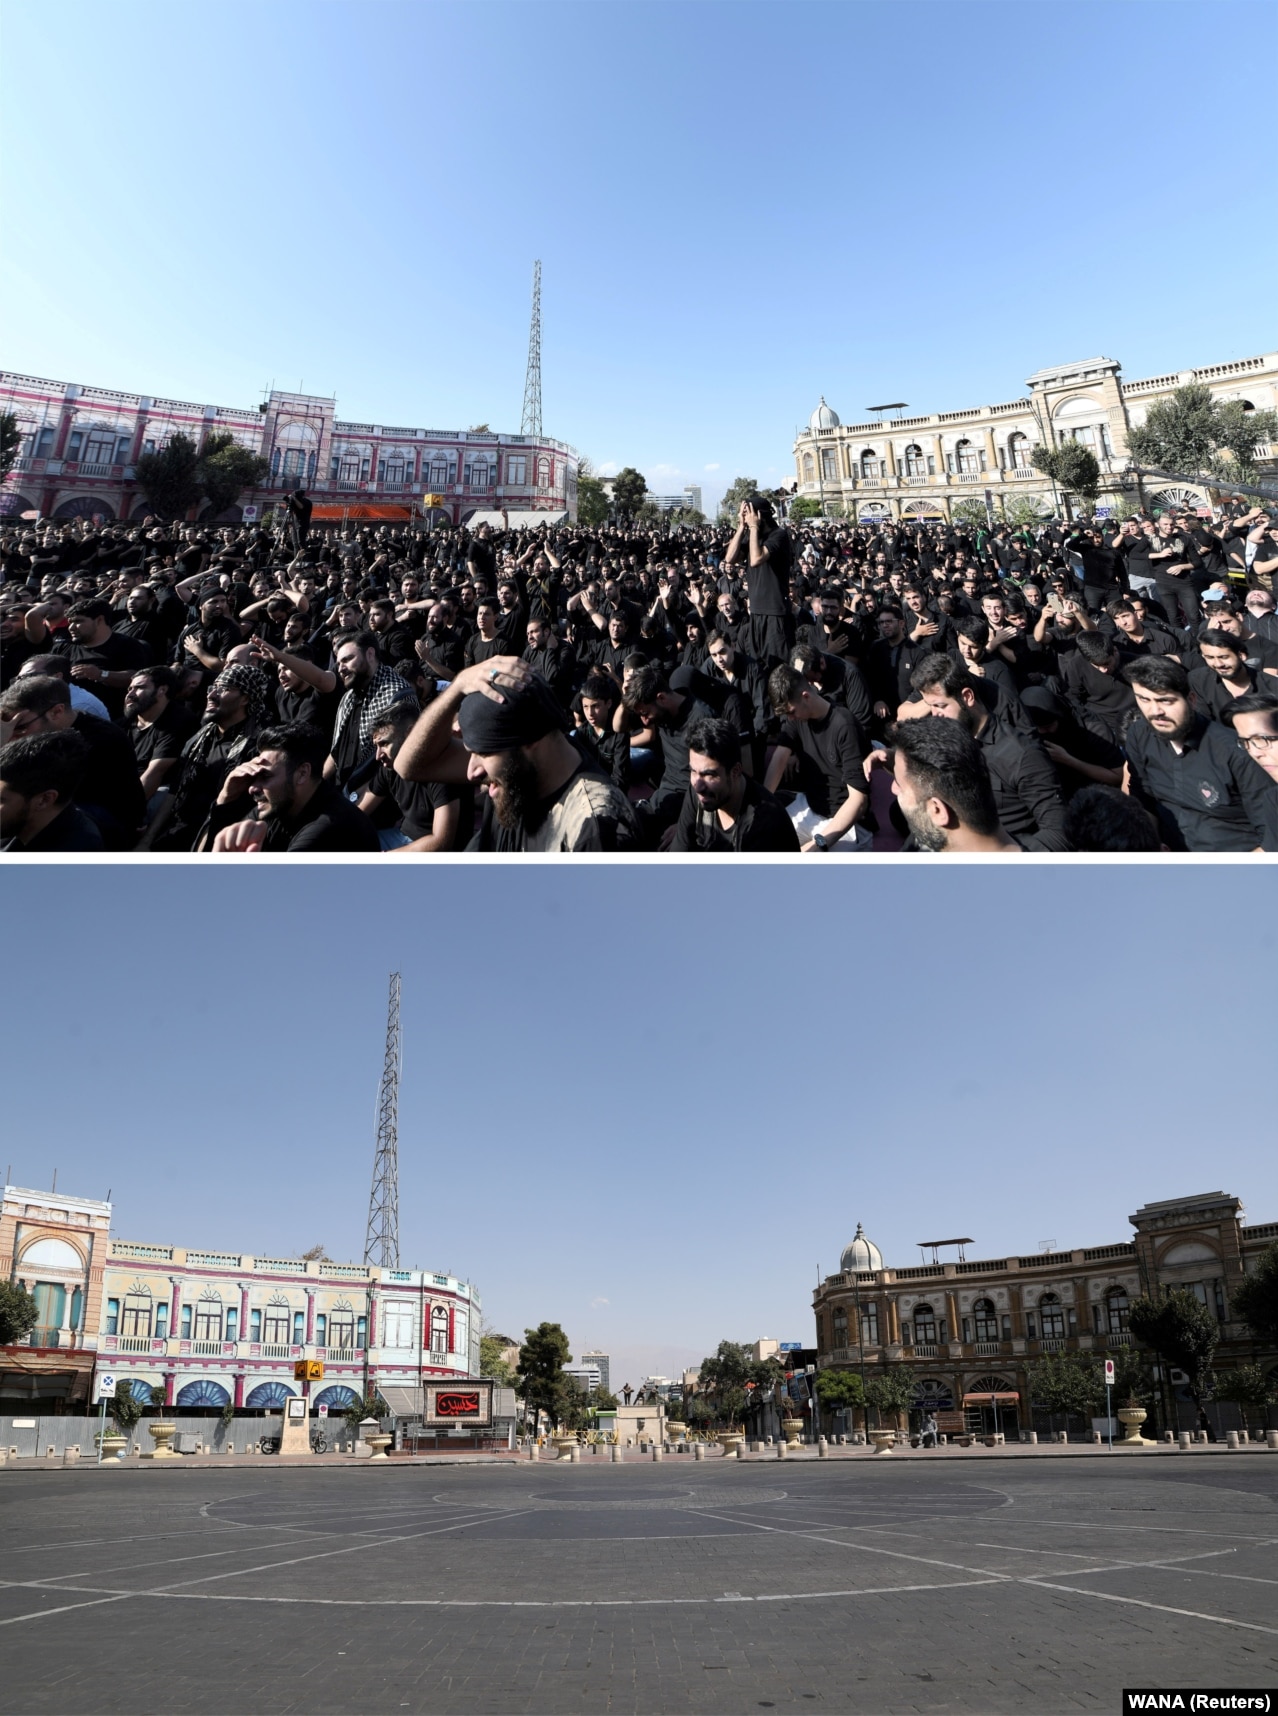 In some places, the pandemic limited public gatherings for Ashura commemorations. The top photo shows a square in Tehran on&nbsp;September 10, 2019. The same location (below) was virtually deserted for Ashura this year, which fell on August 30.